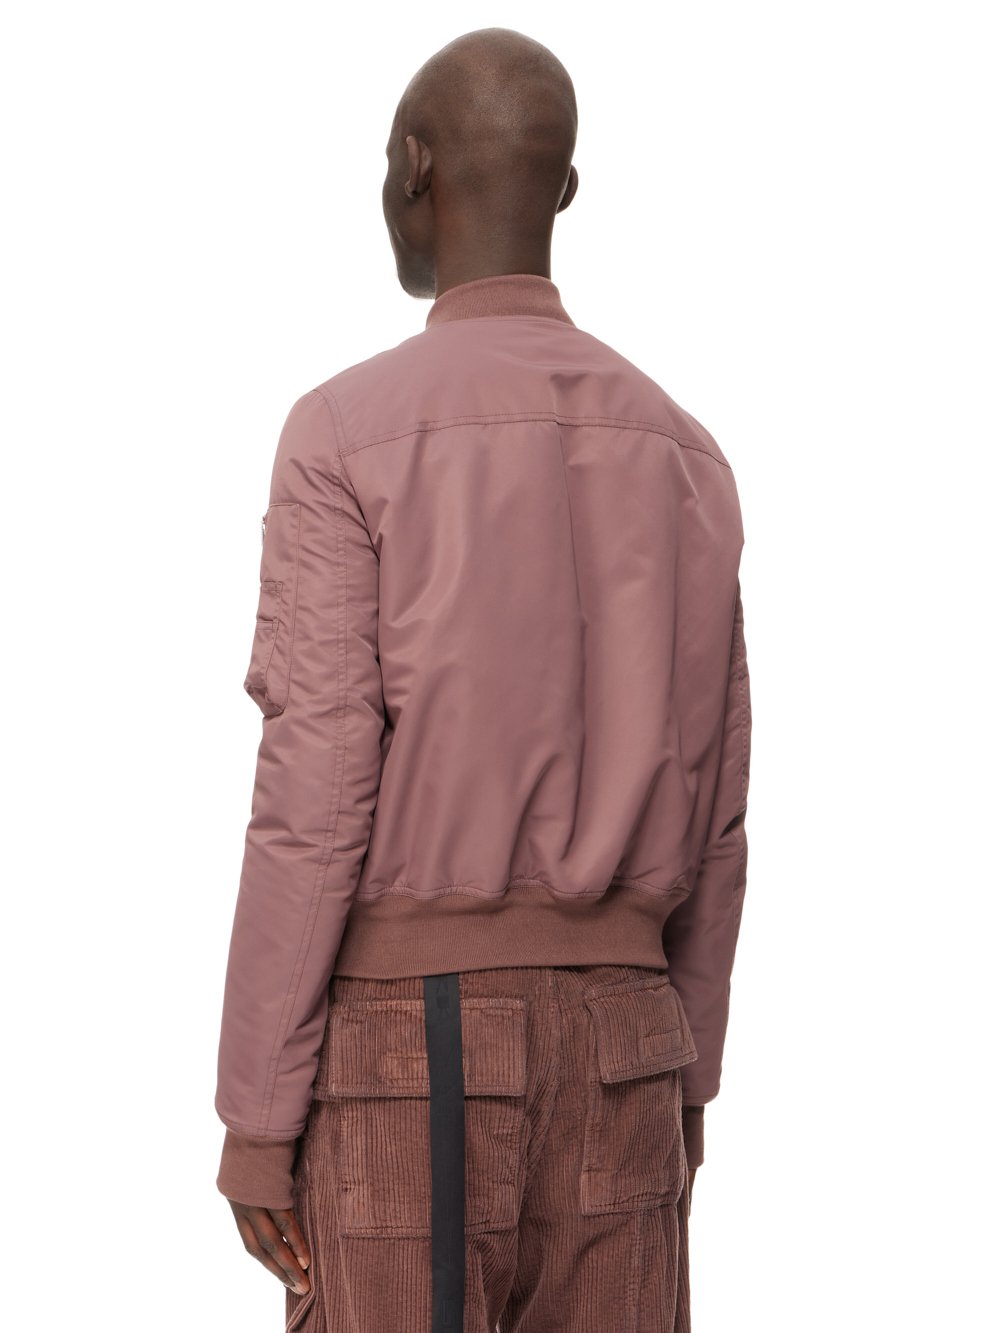 DRKSHDW FW23 LUXOR FLIGHT BOMBER IN MAUVE AND PALE GREEN RECYCLED BOMBER